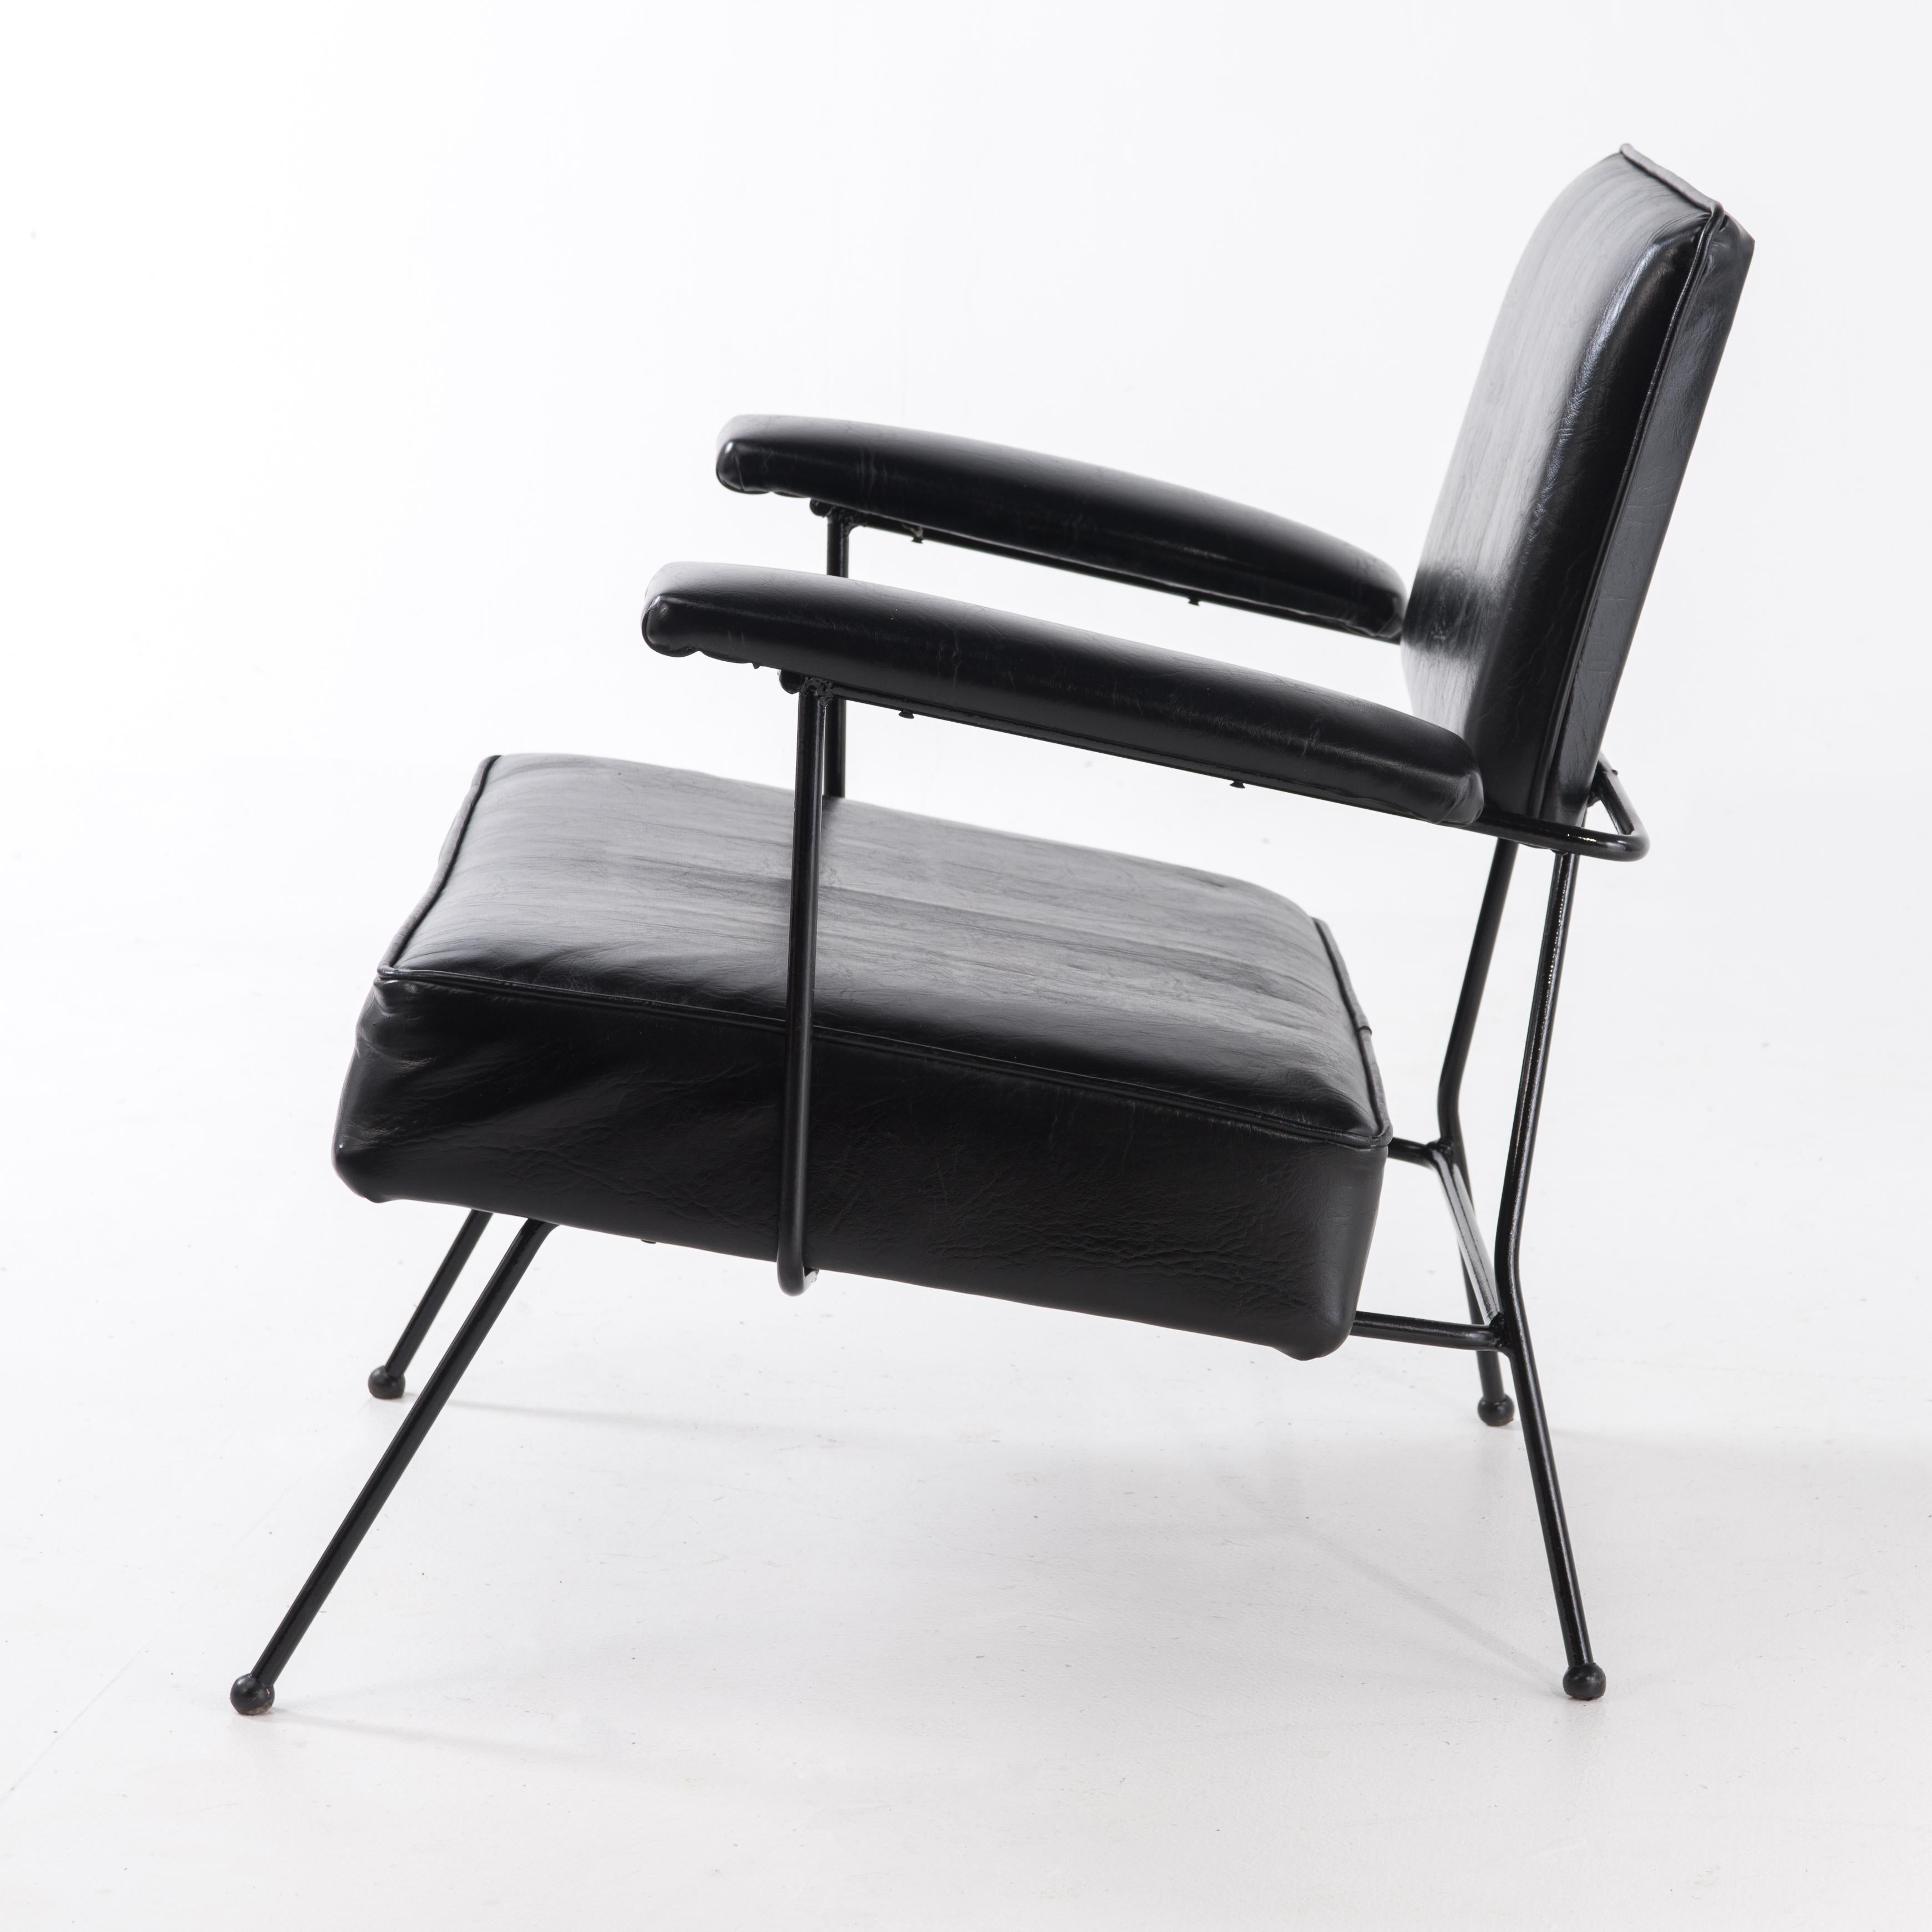 Mid-20th Century Mid-Century Modern Black Adrian Pearsall for Craft Armchair Lounge Chair For Sale